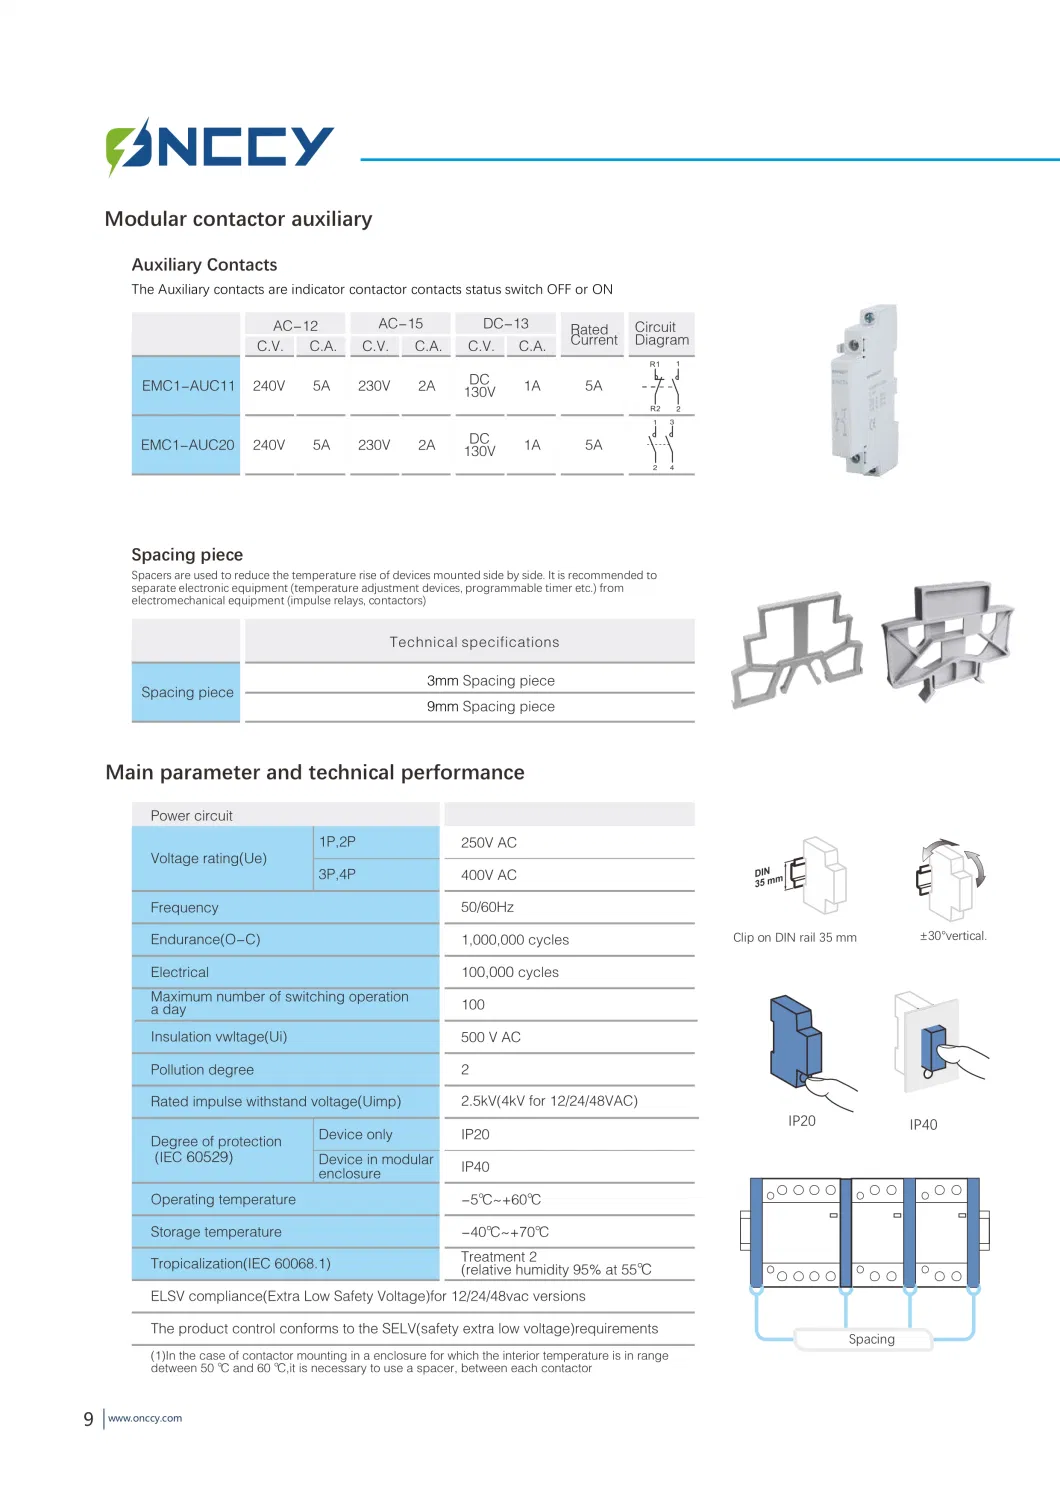 16A-125A AC Modular Contactor for Lighting Systems, Heat Pumps, Air-Conditioning or Ventilation Systems.